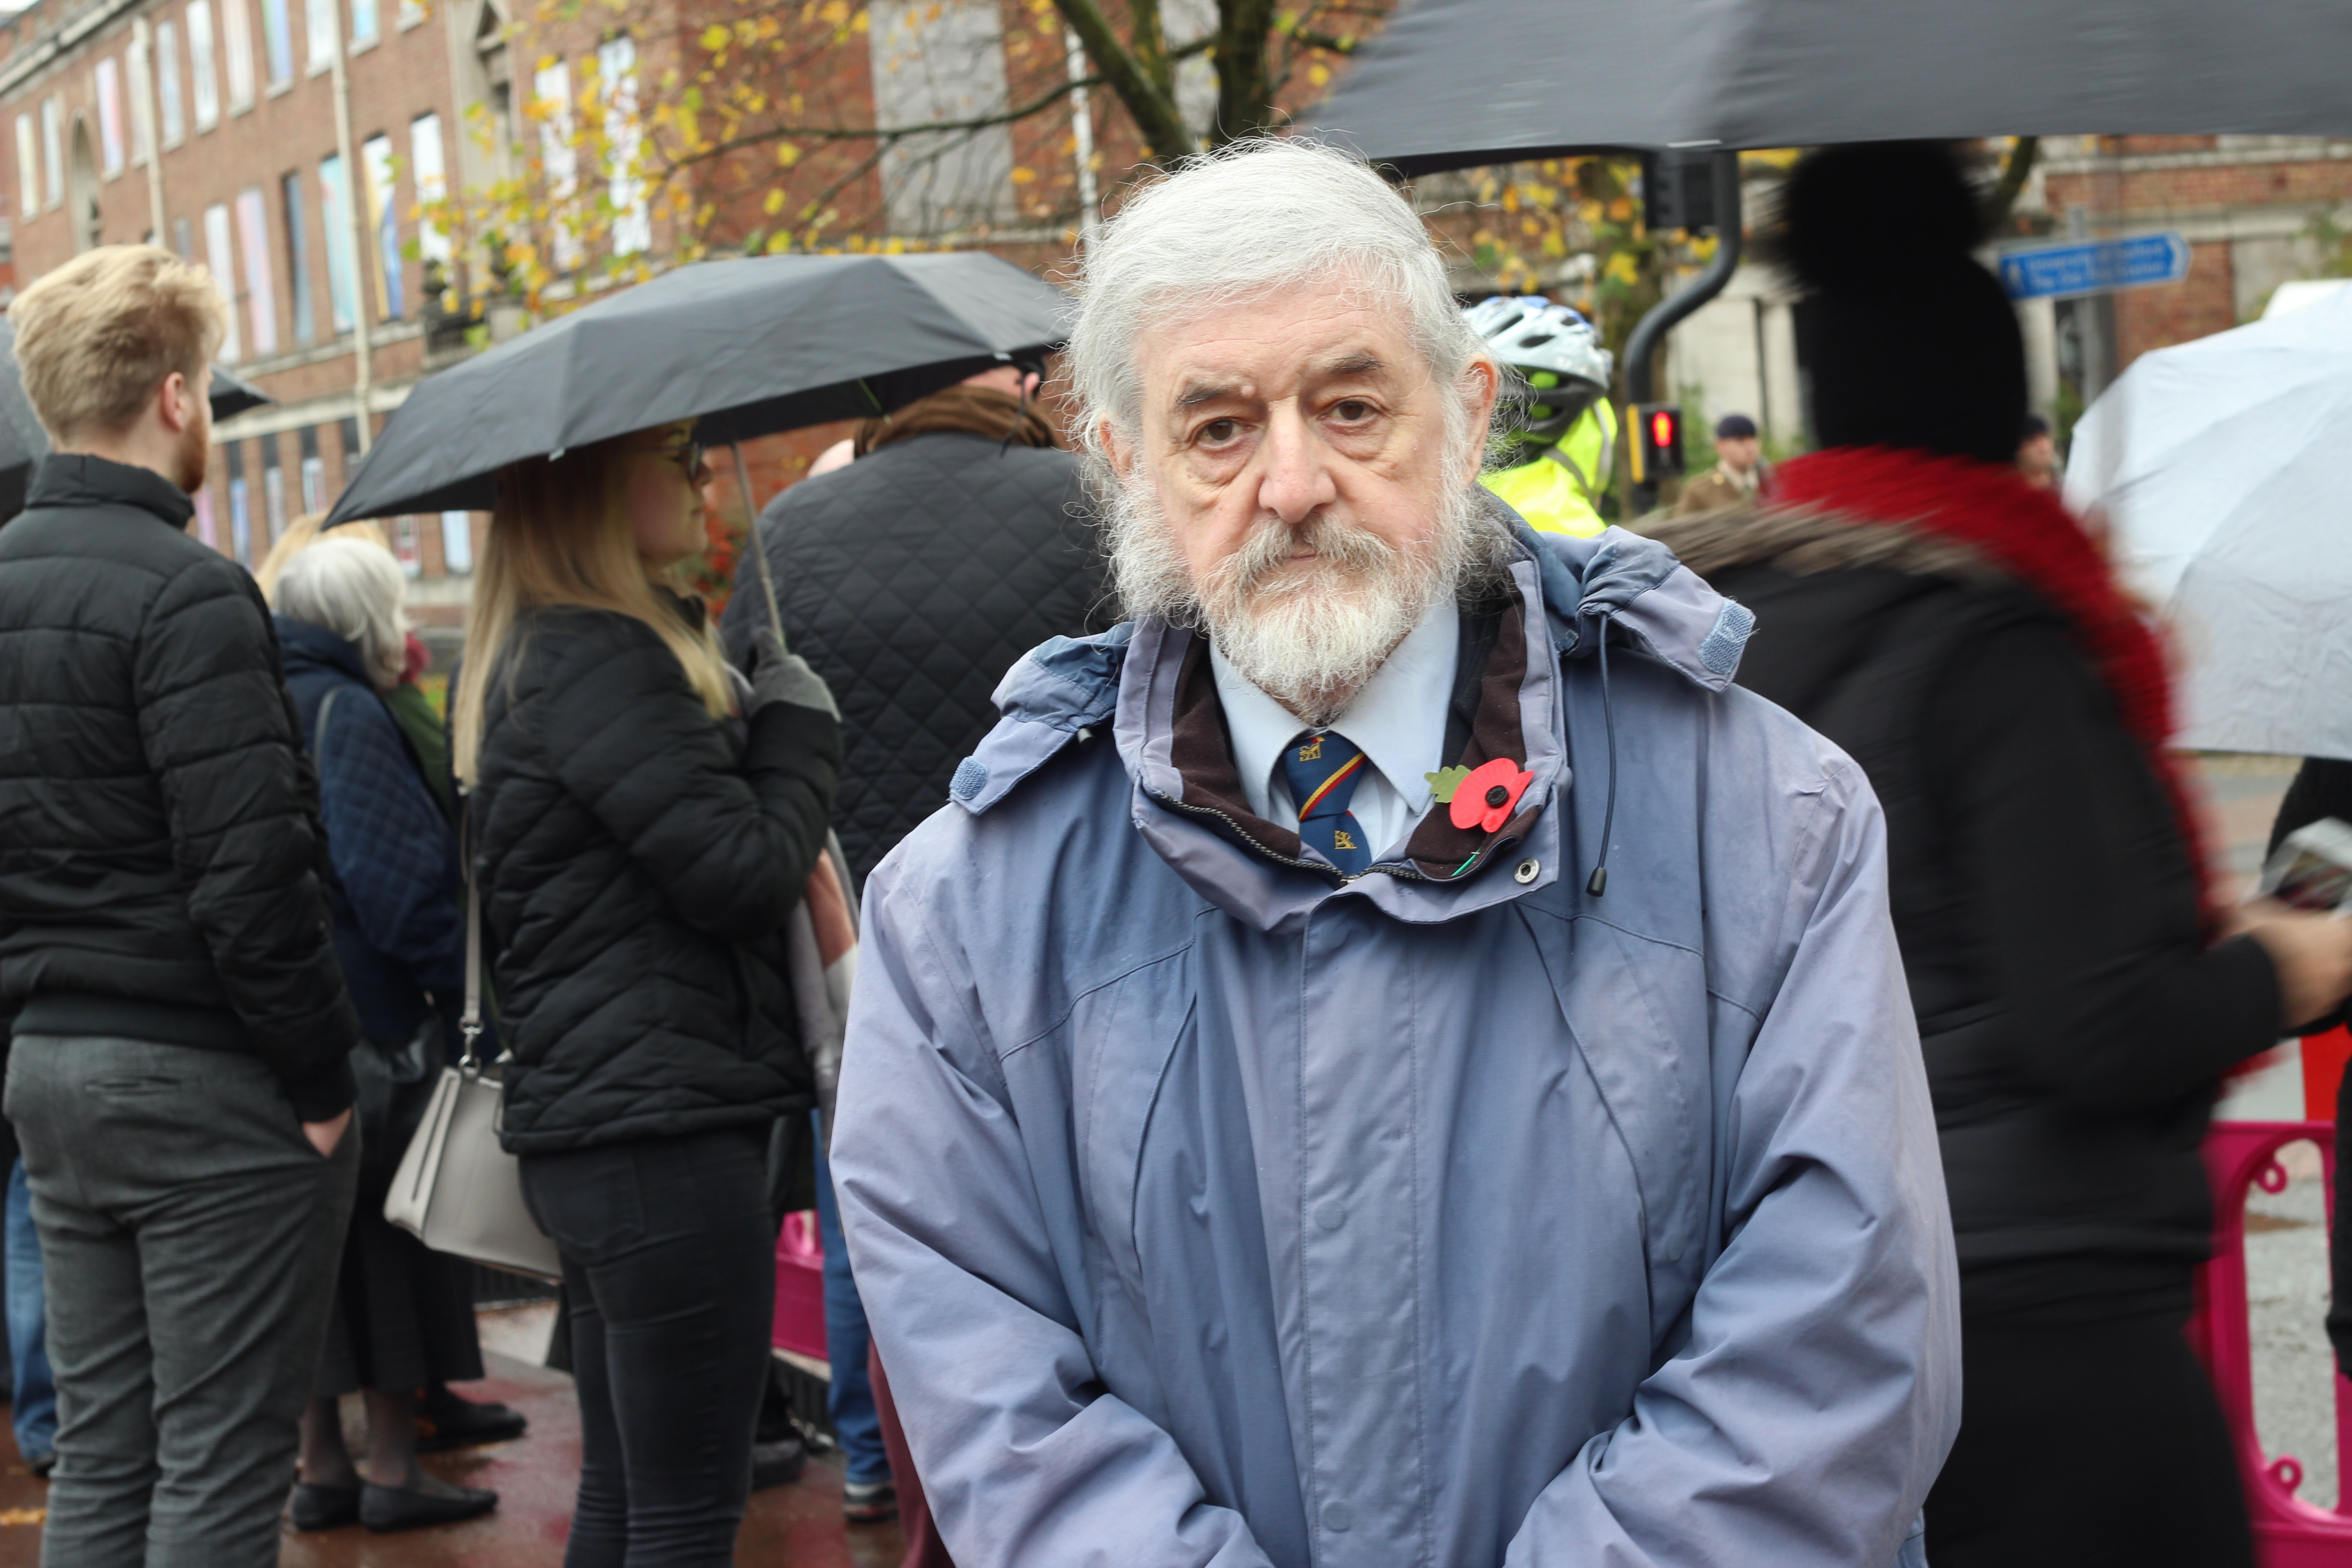 Don Rainger tries to come the Remembrance Day every year - Image: Kelly Nguyen